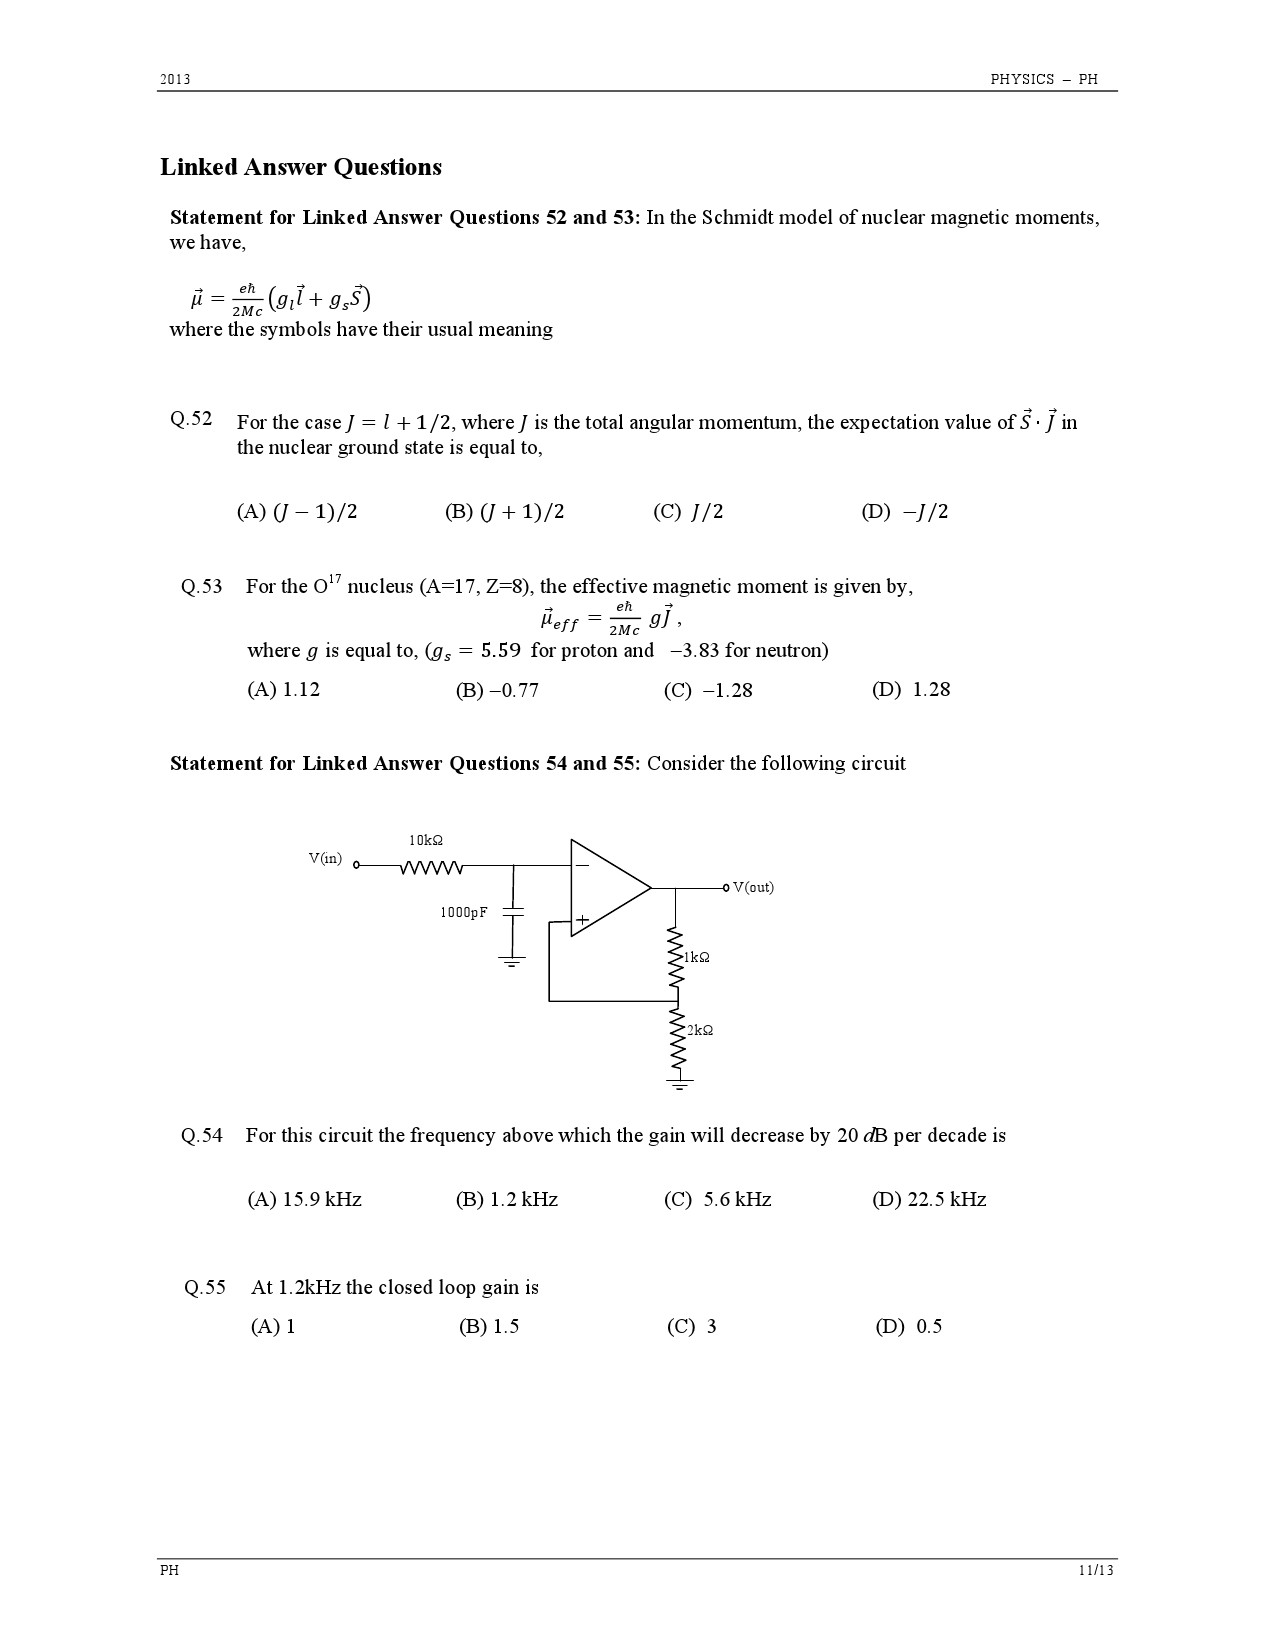 GATE Exam Question Paper 2013 Physics 11